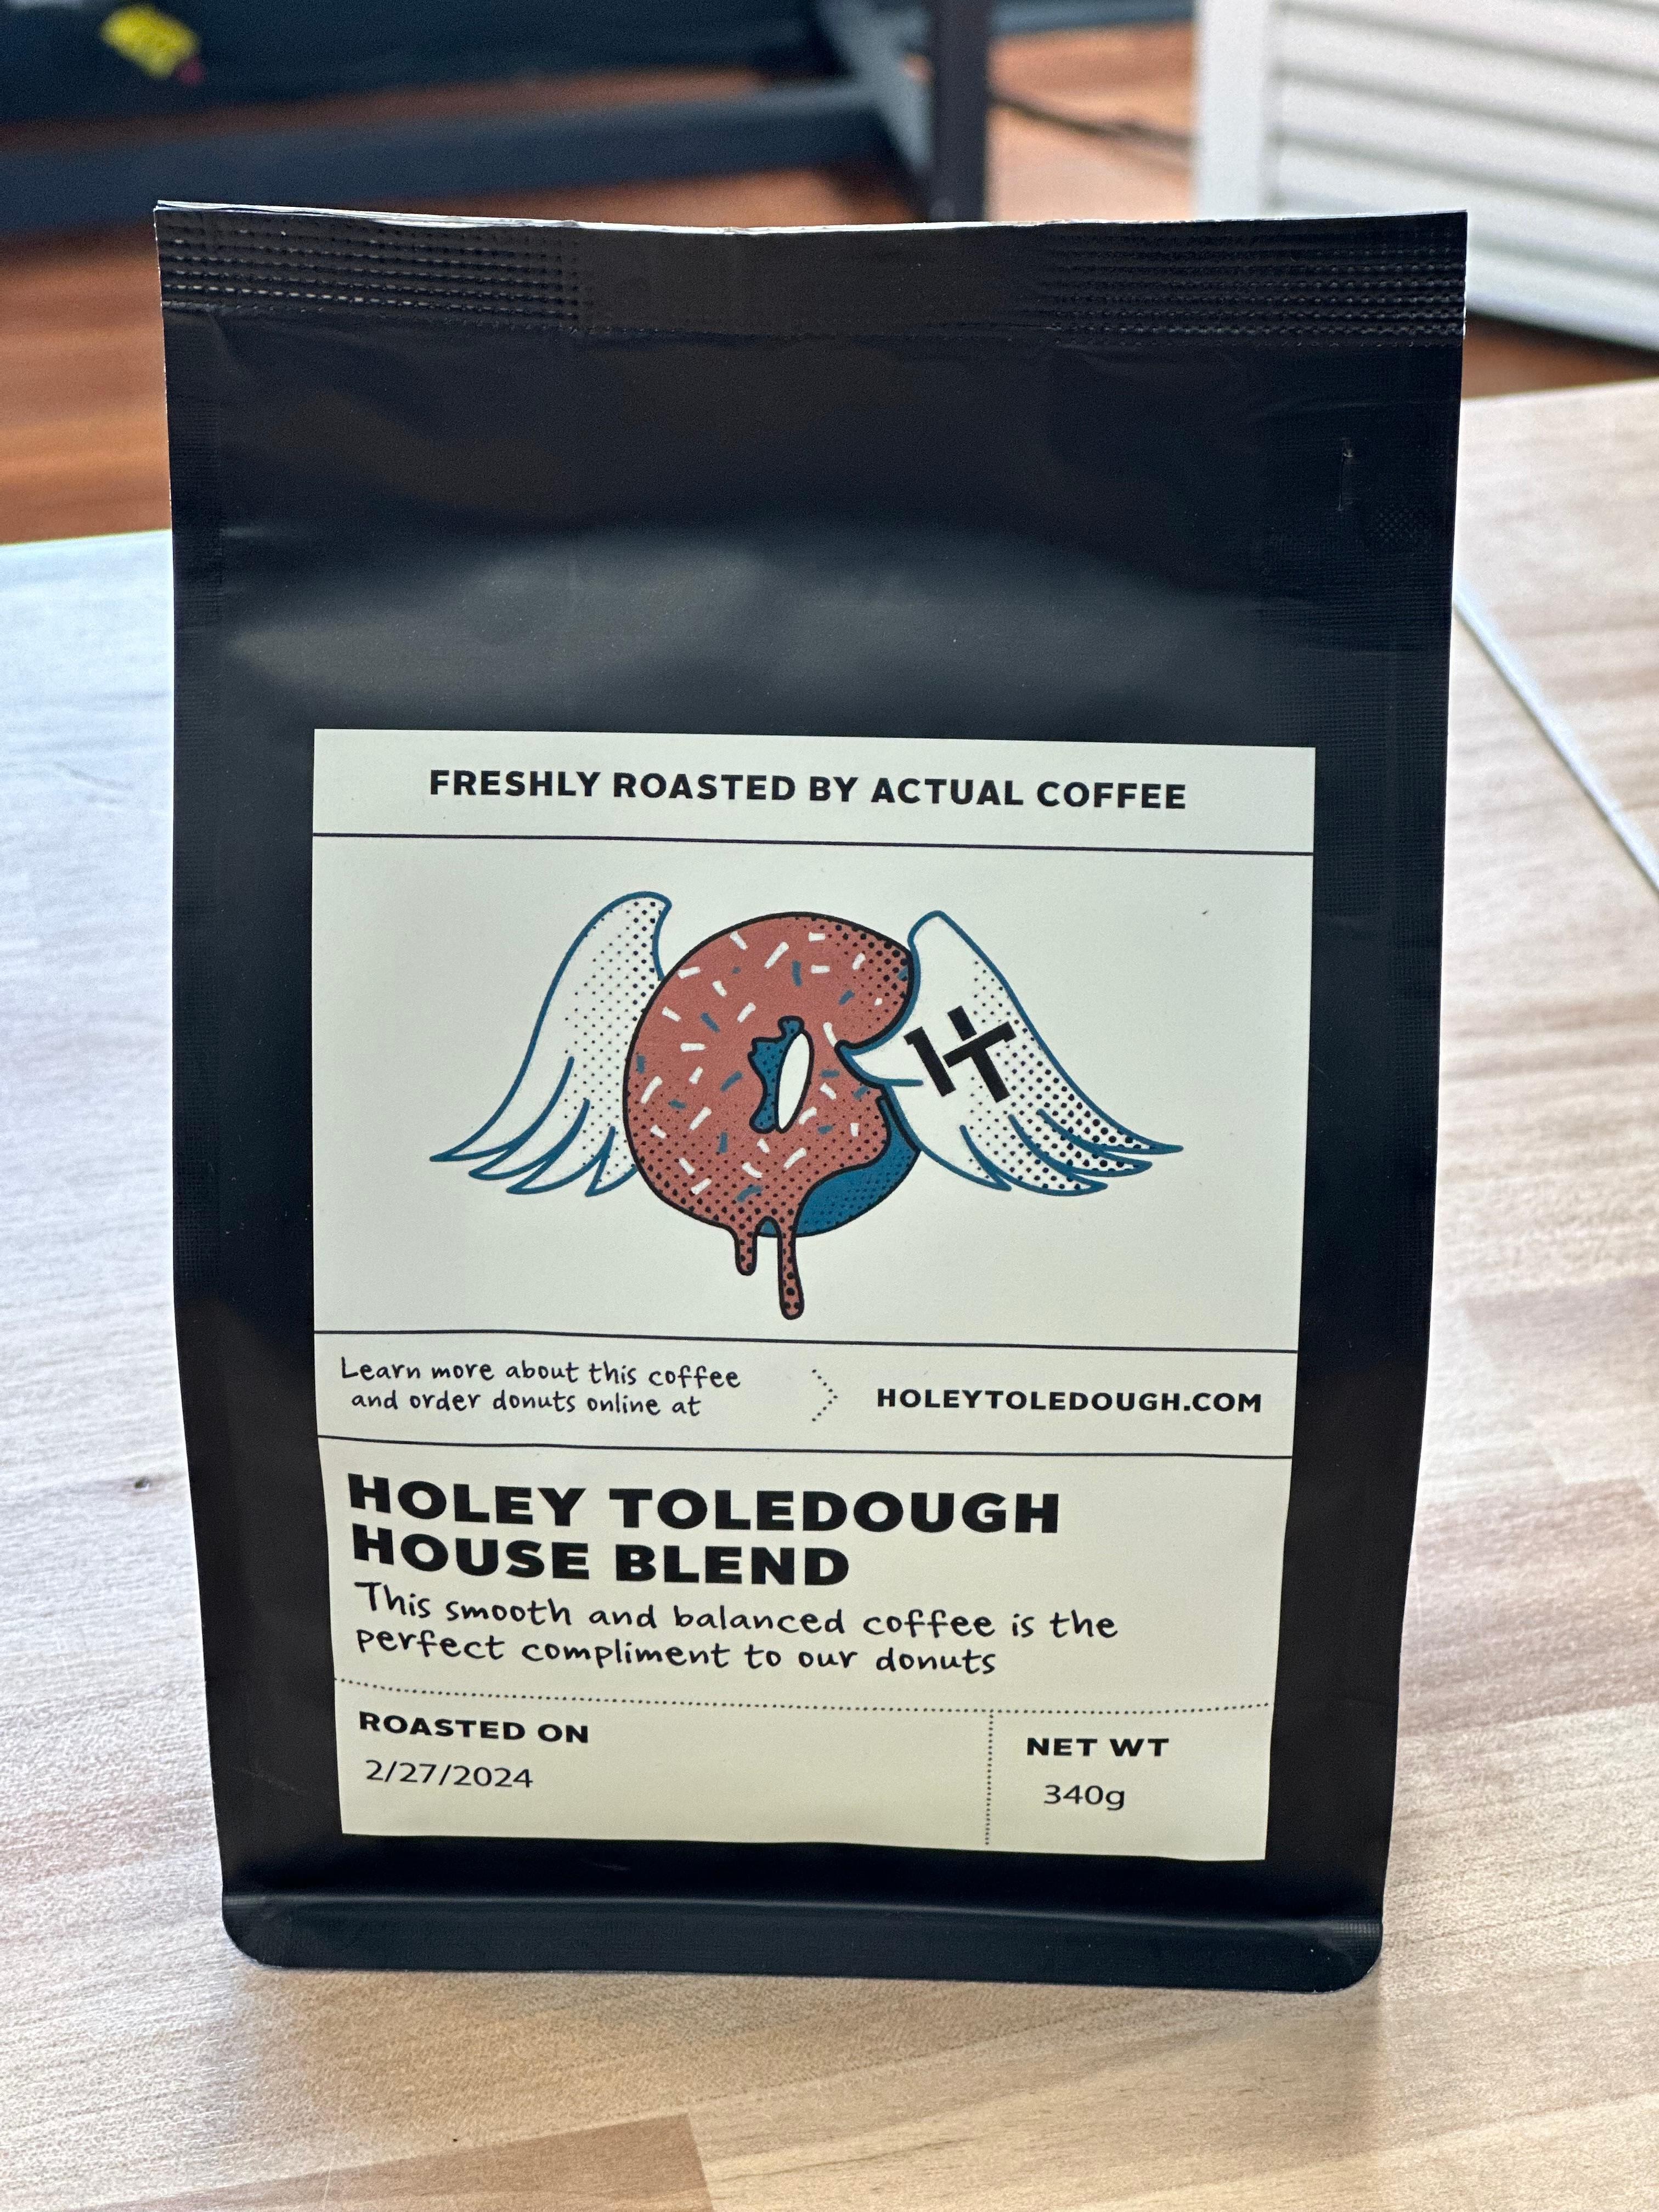 Bag of Coffee - Holey Toledough House Blend